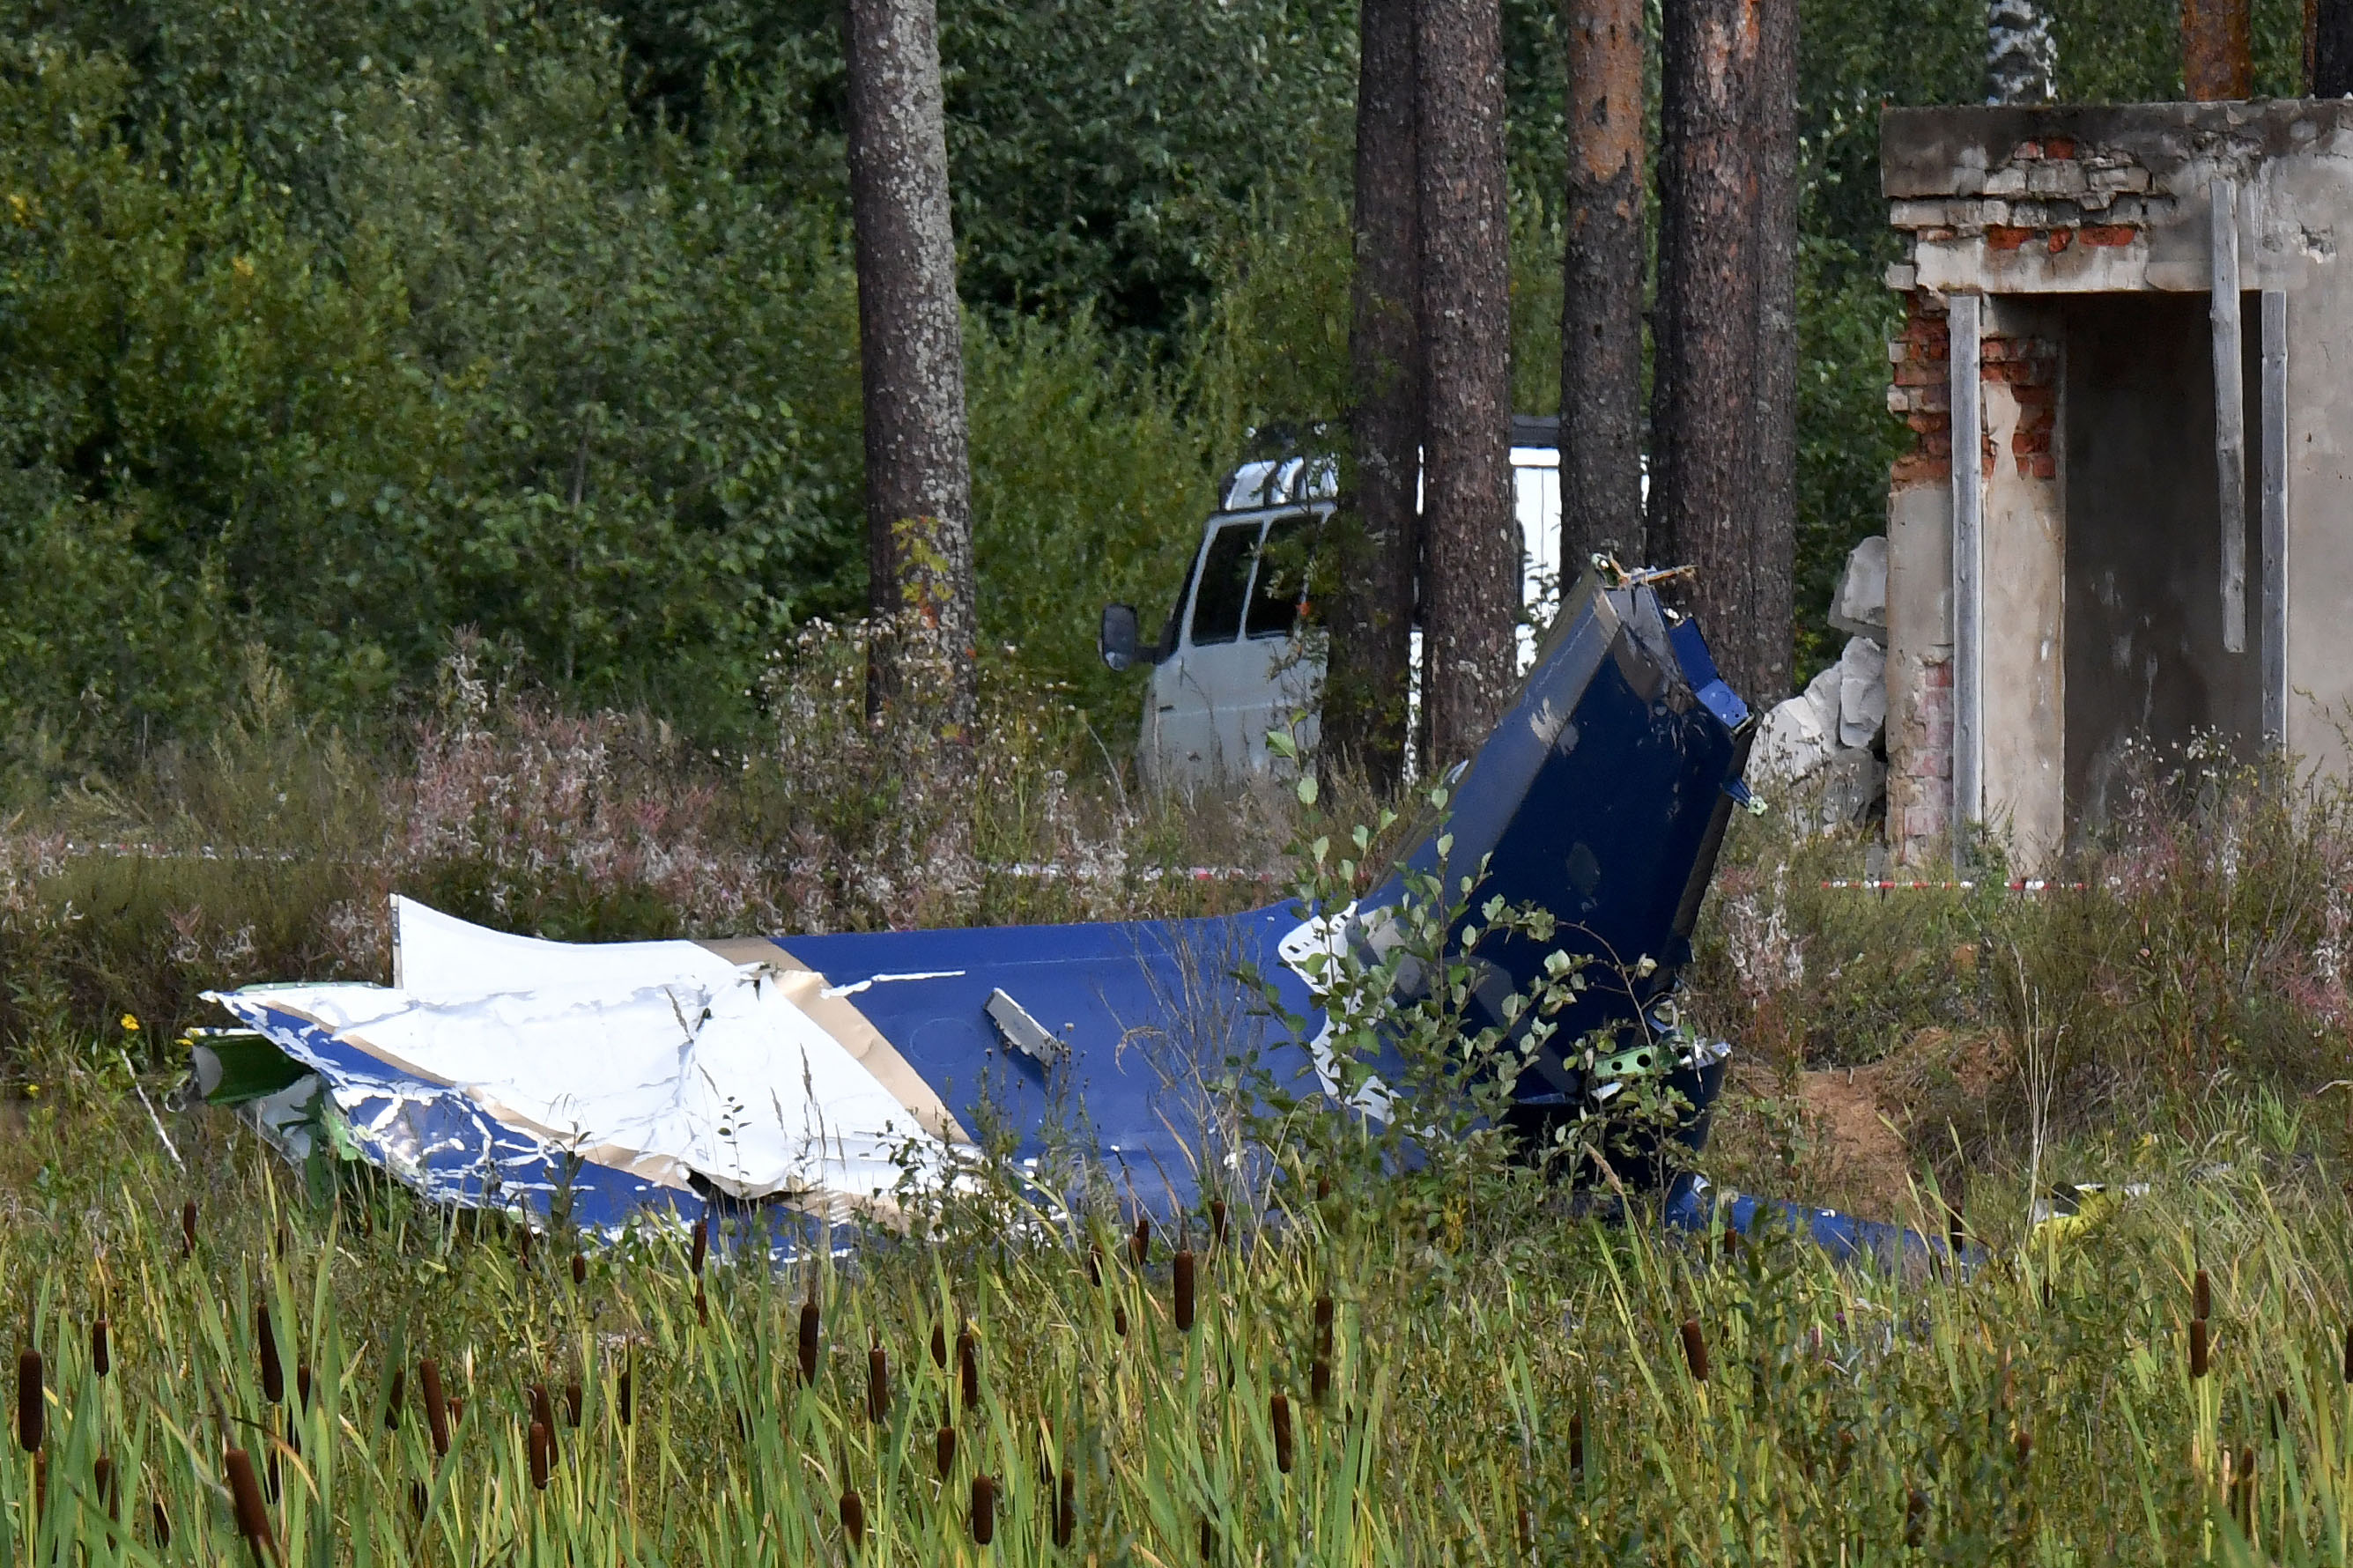 The wreckage of a plane is seen at the site of the crash near the village of Kuzhenkino, Russia, on Thursday.